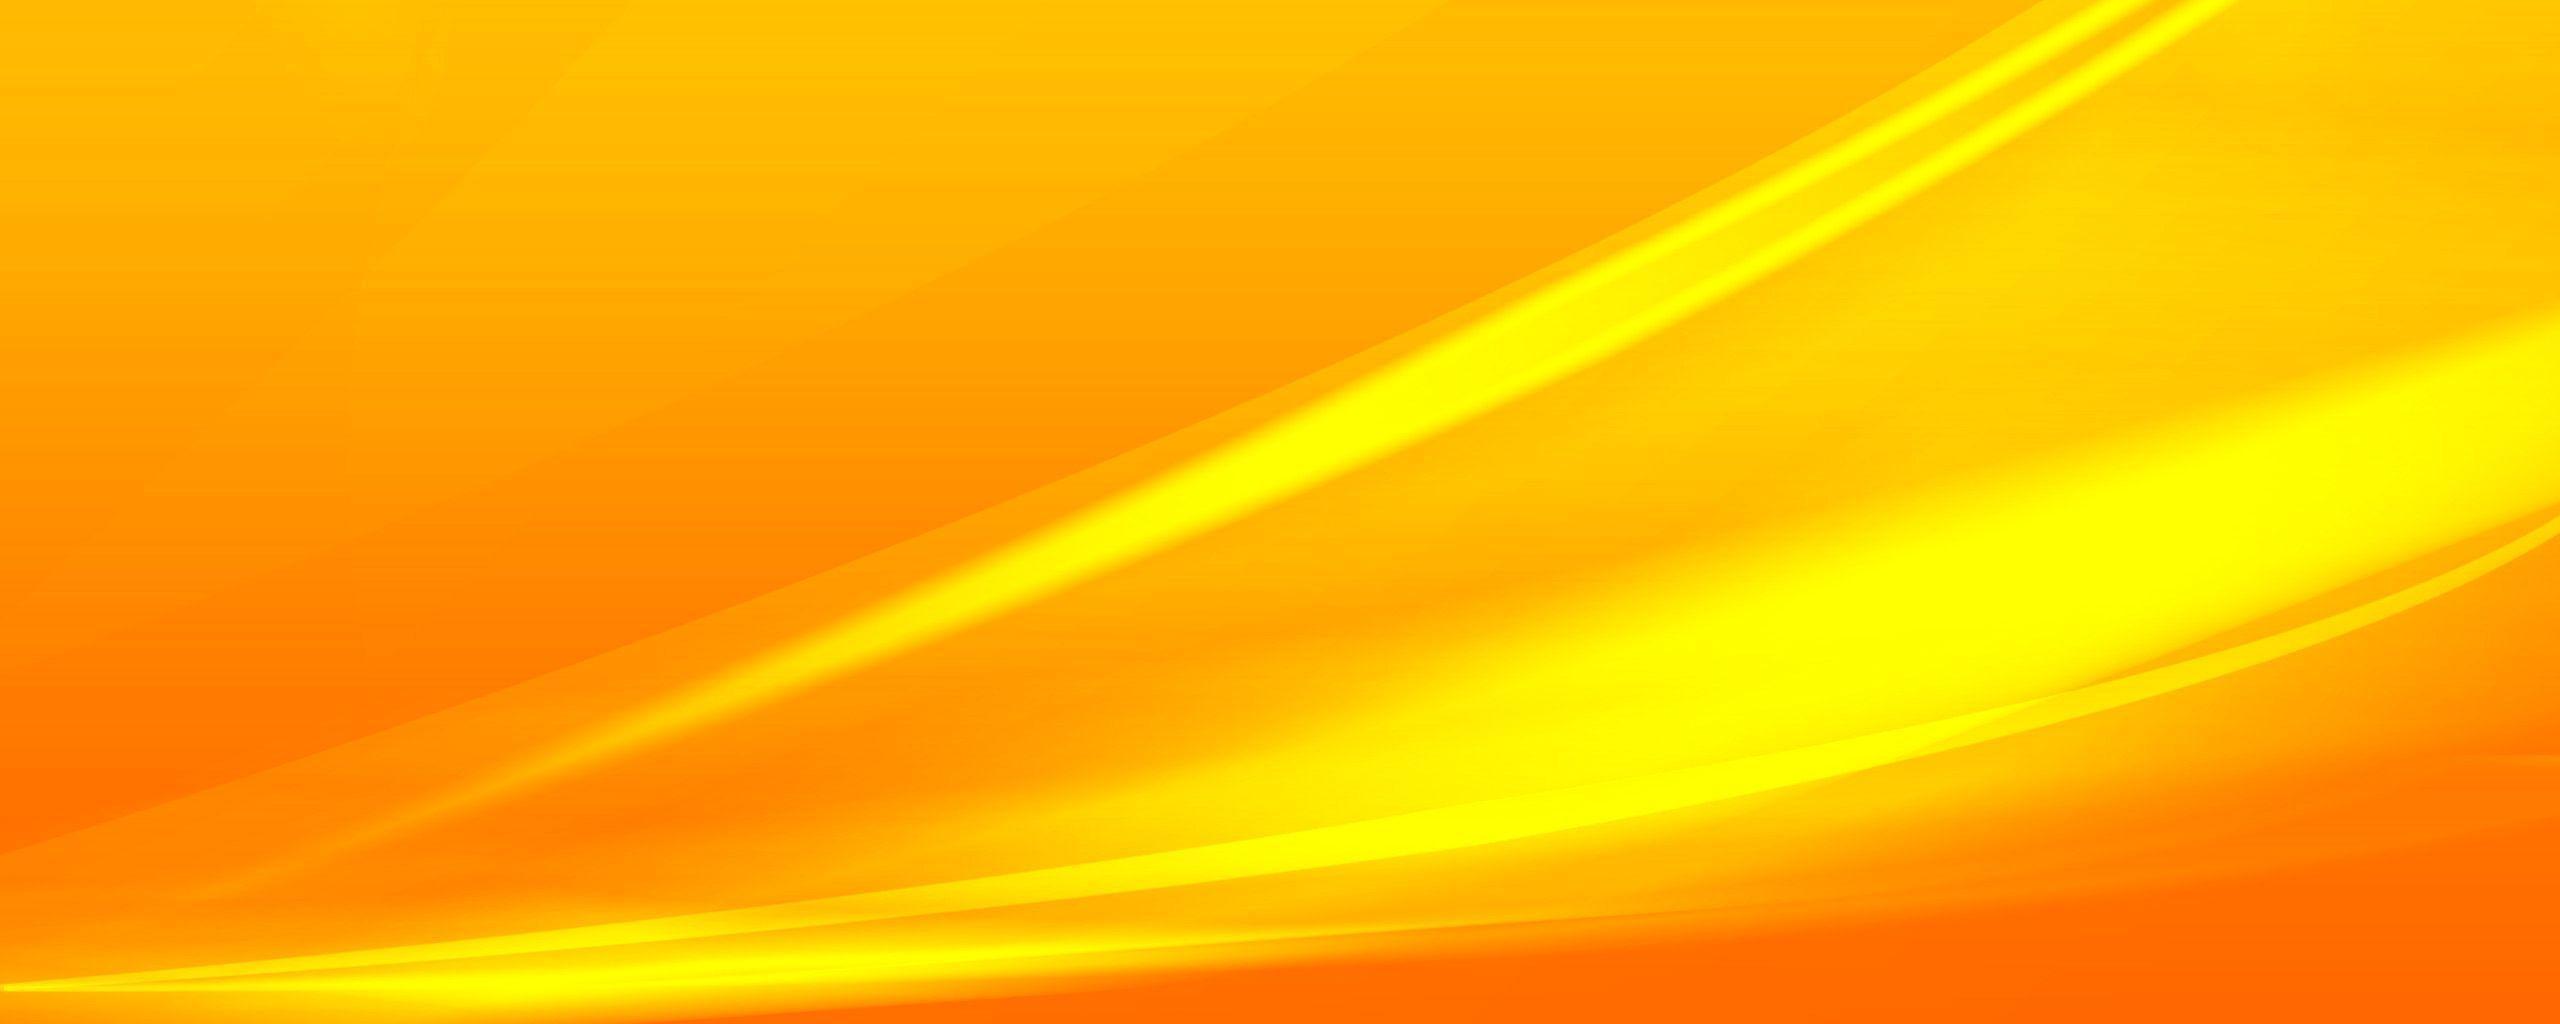 Wallpaper For Gt HD Background Yellow. High Definition image